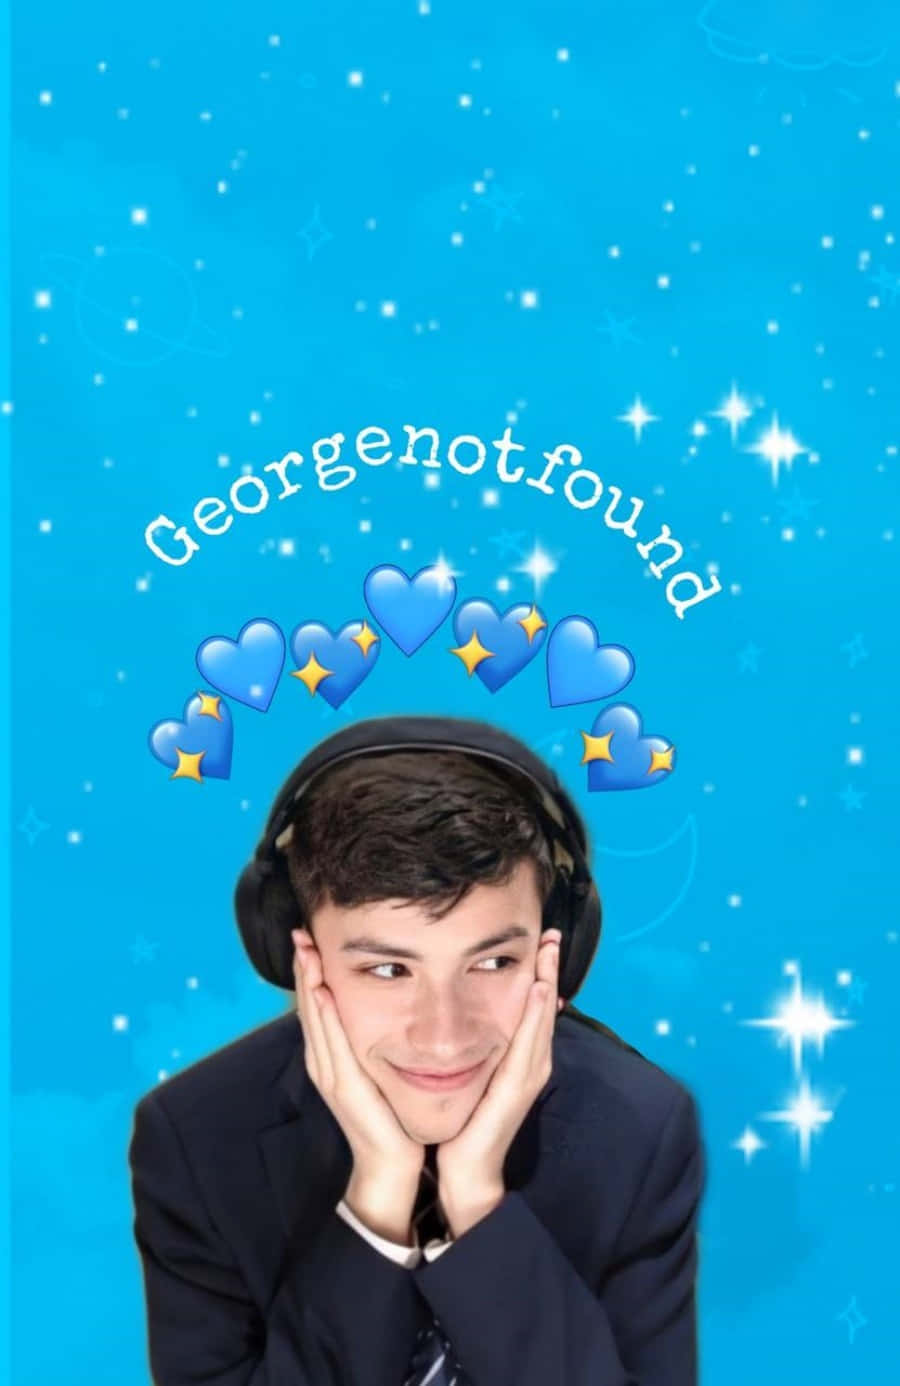 Georgenotfound With Blue Hearts